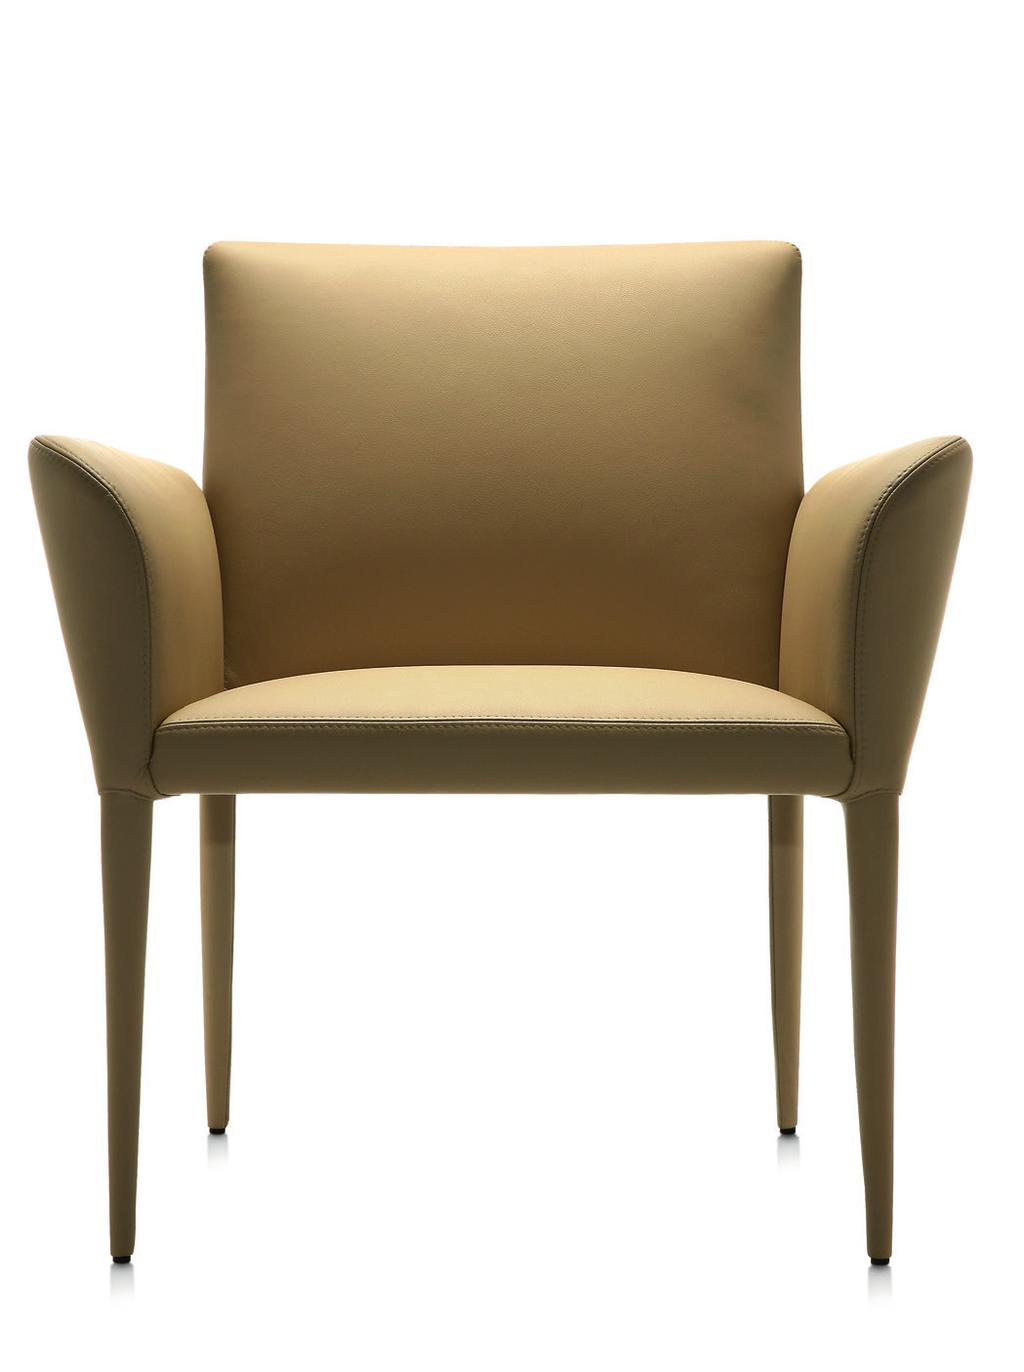 Padded lounge armchair, fully upholstered with leather or fabric. Flexible back with harmonic steel blades. Steel frame.